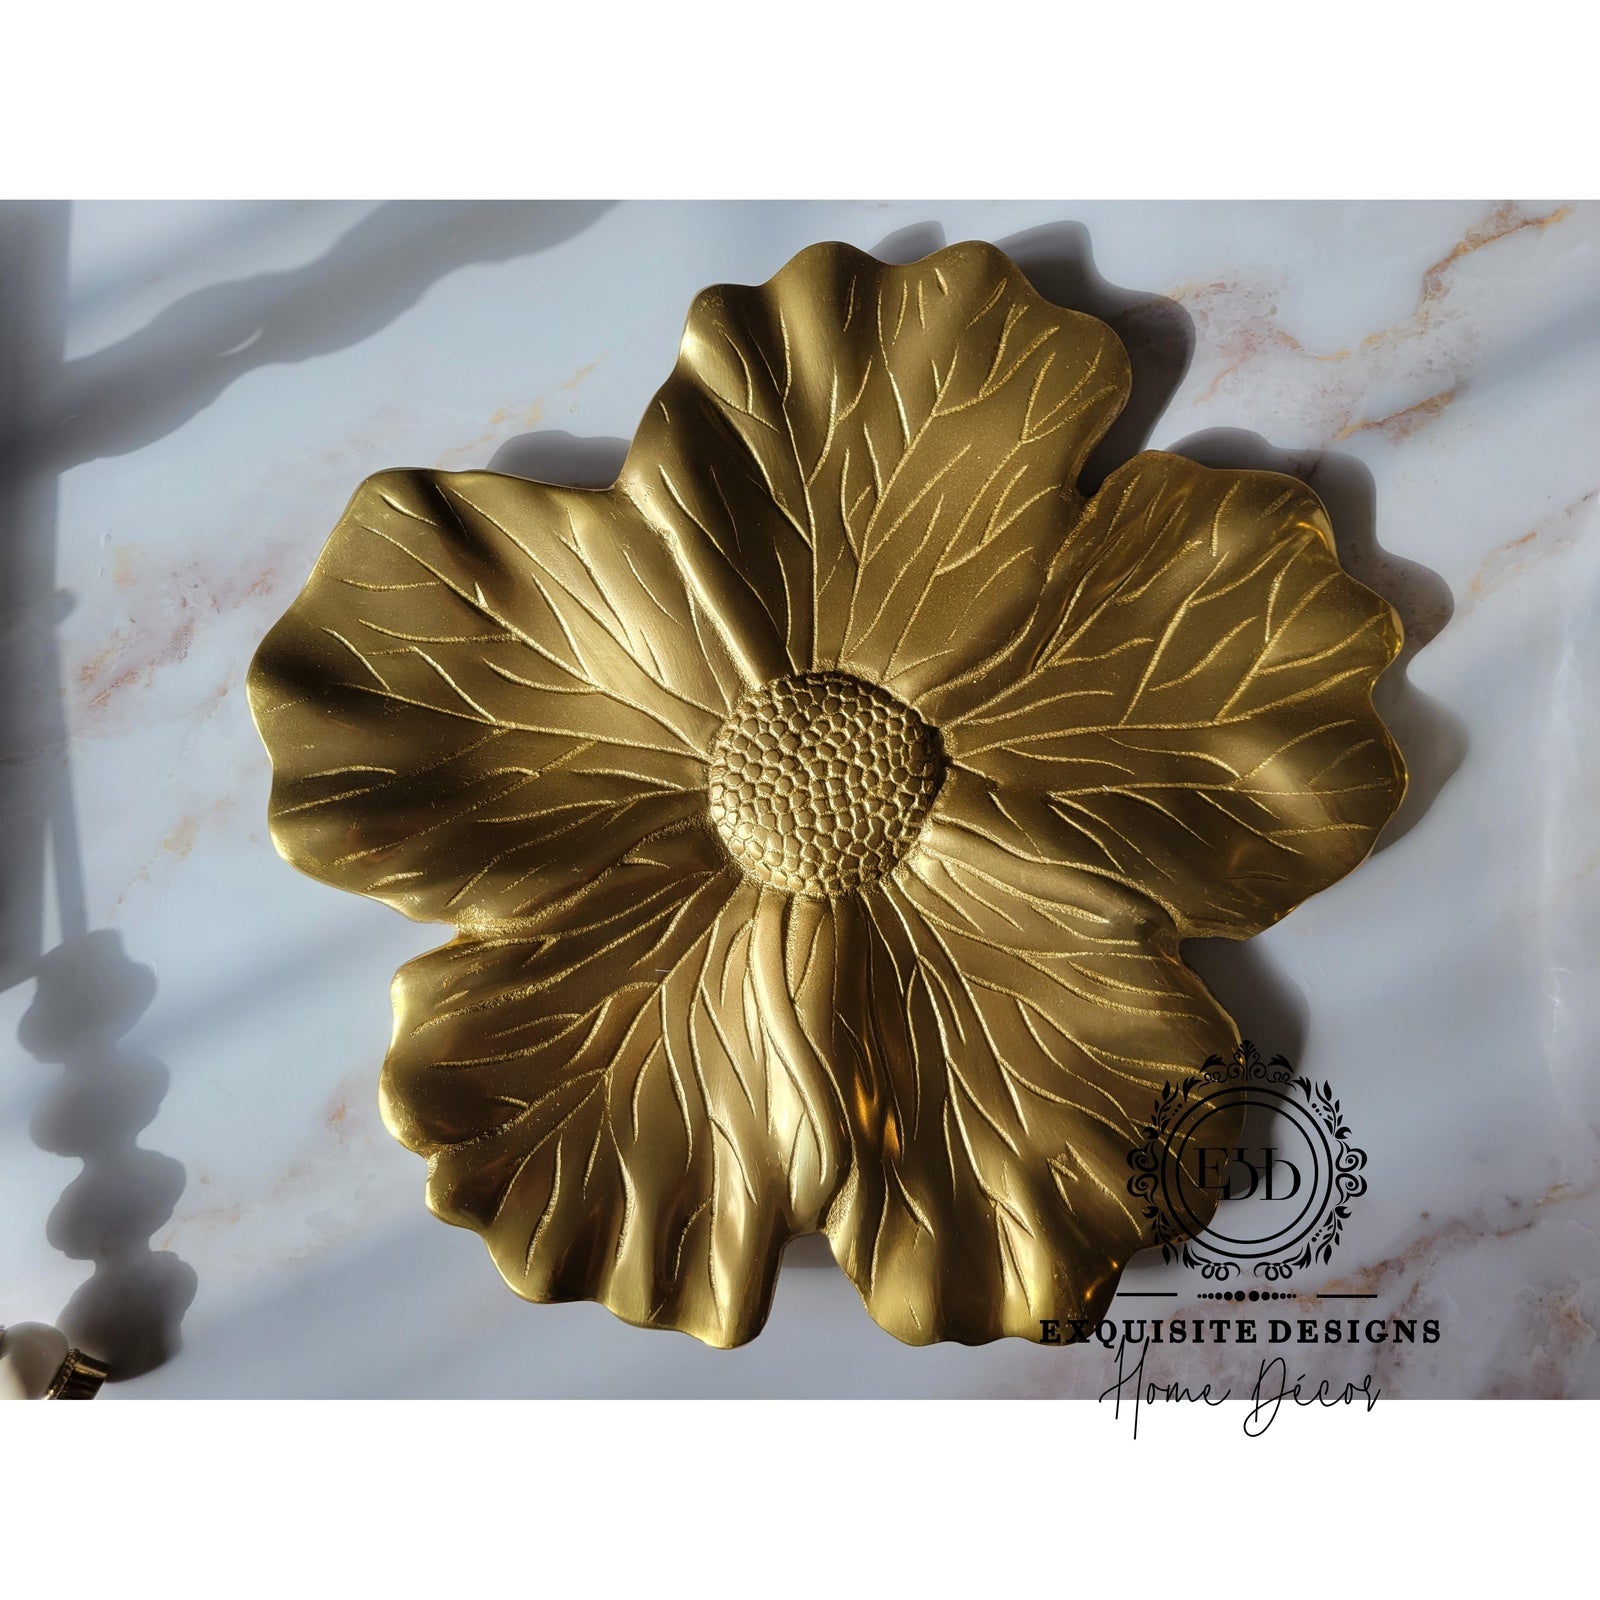 Gilded Flower Tray - Exquisite Designs Home Décor 